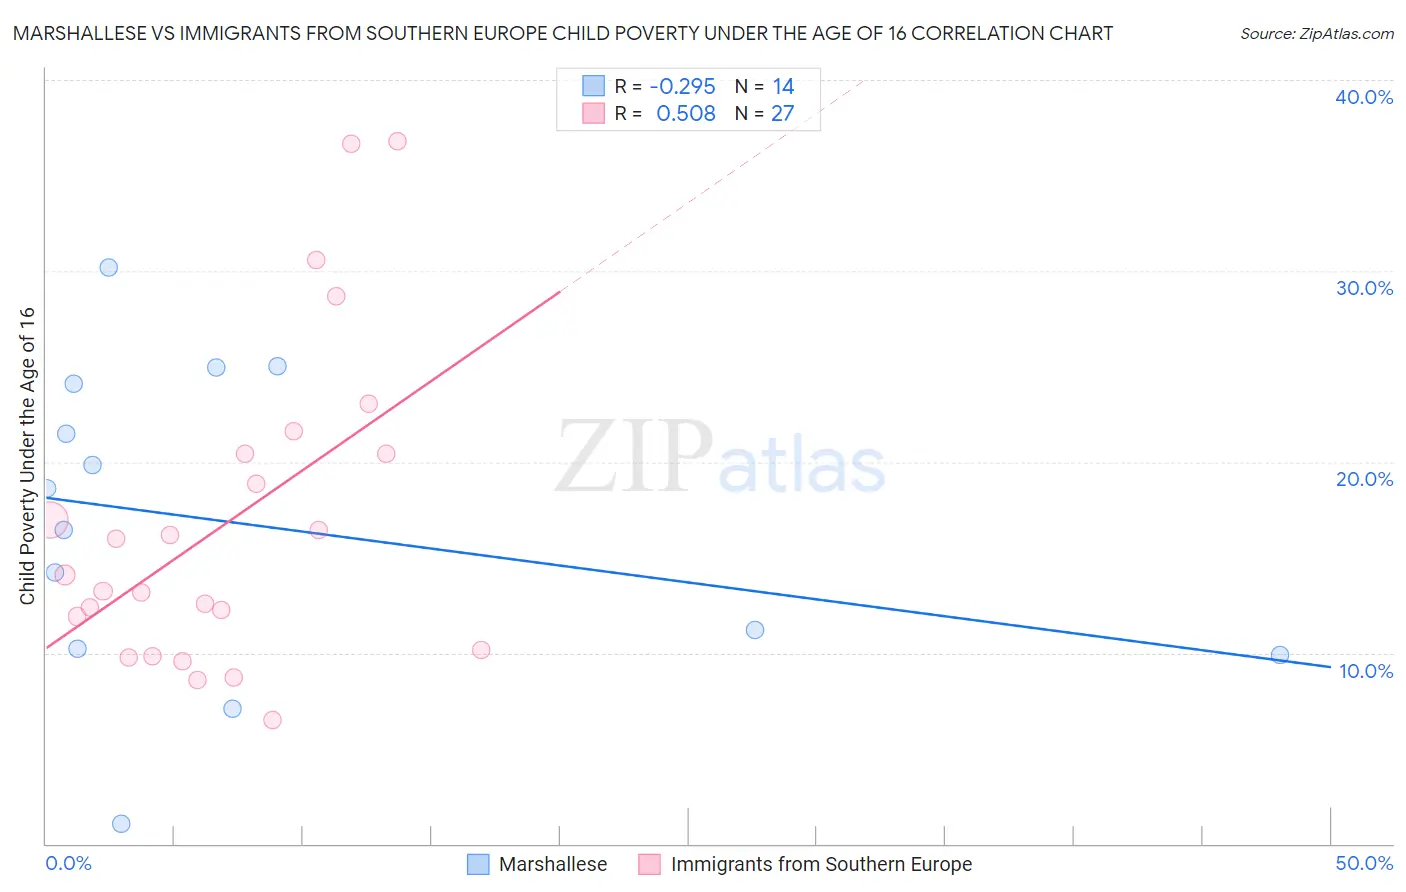 Marshallese vs Immigrants from Southern Europe Child Poverty Under the Age of 16